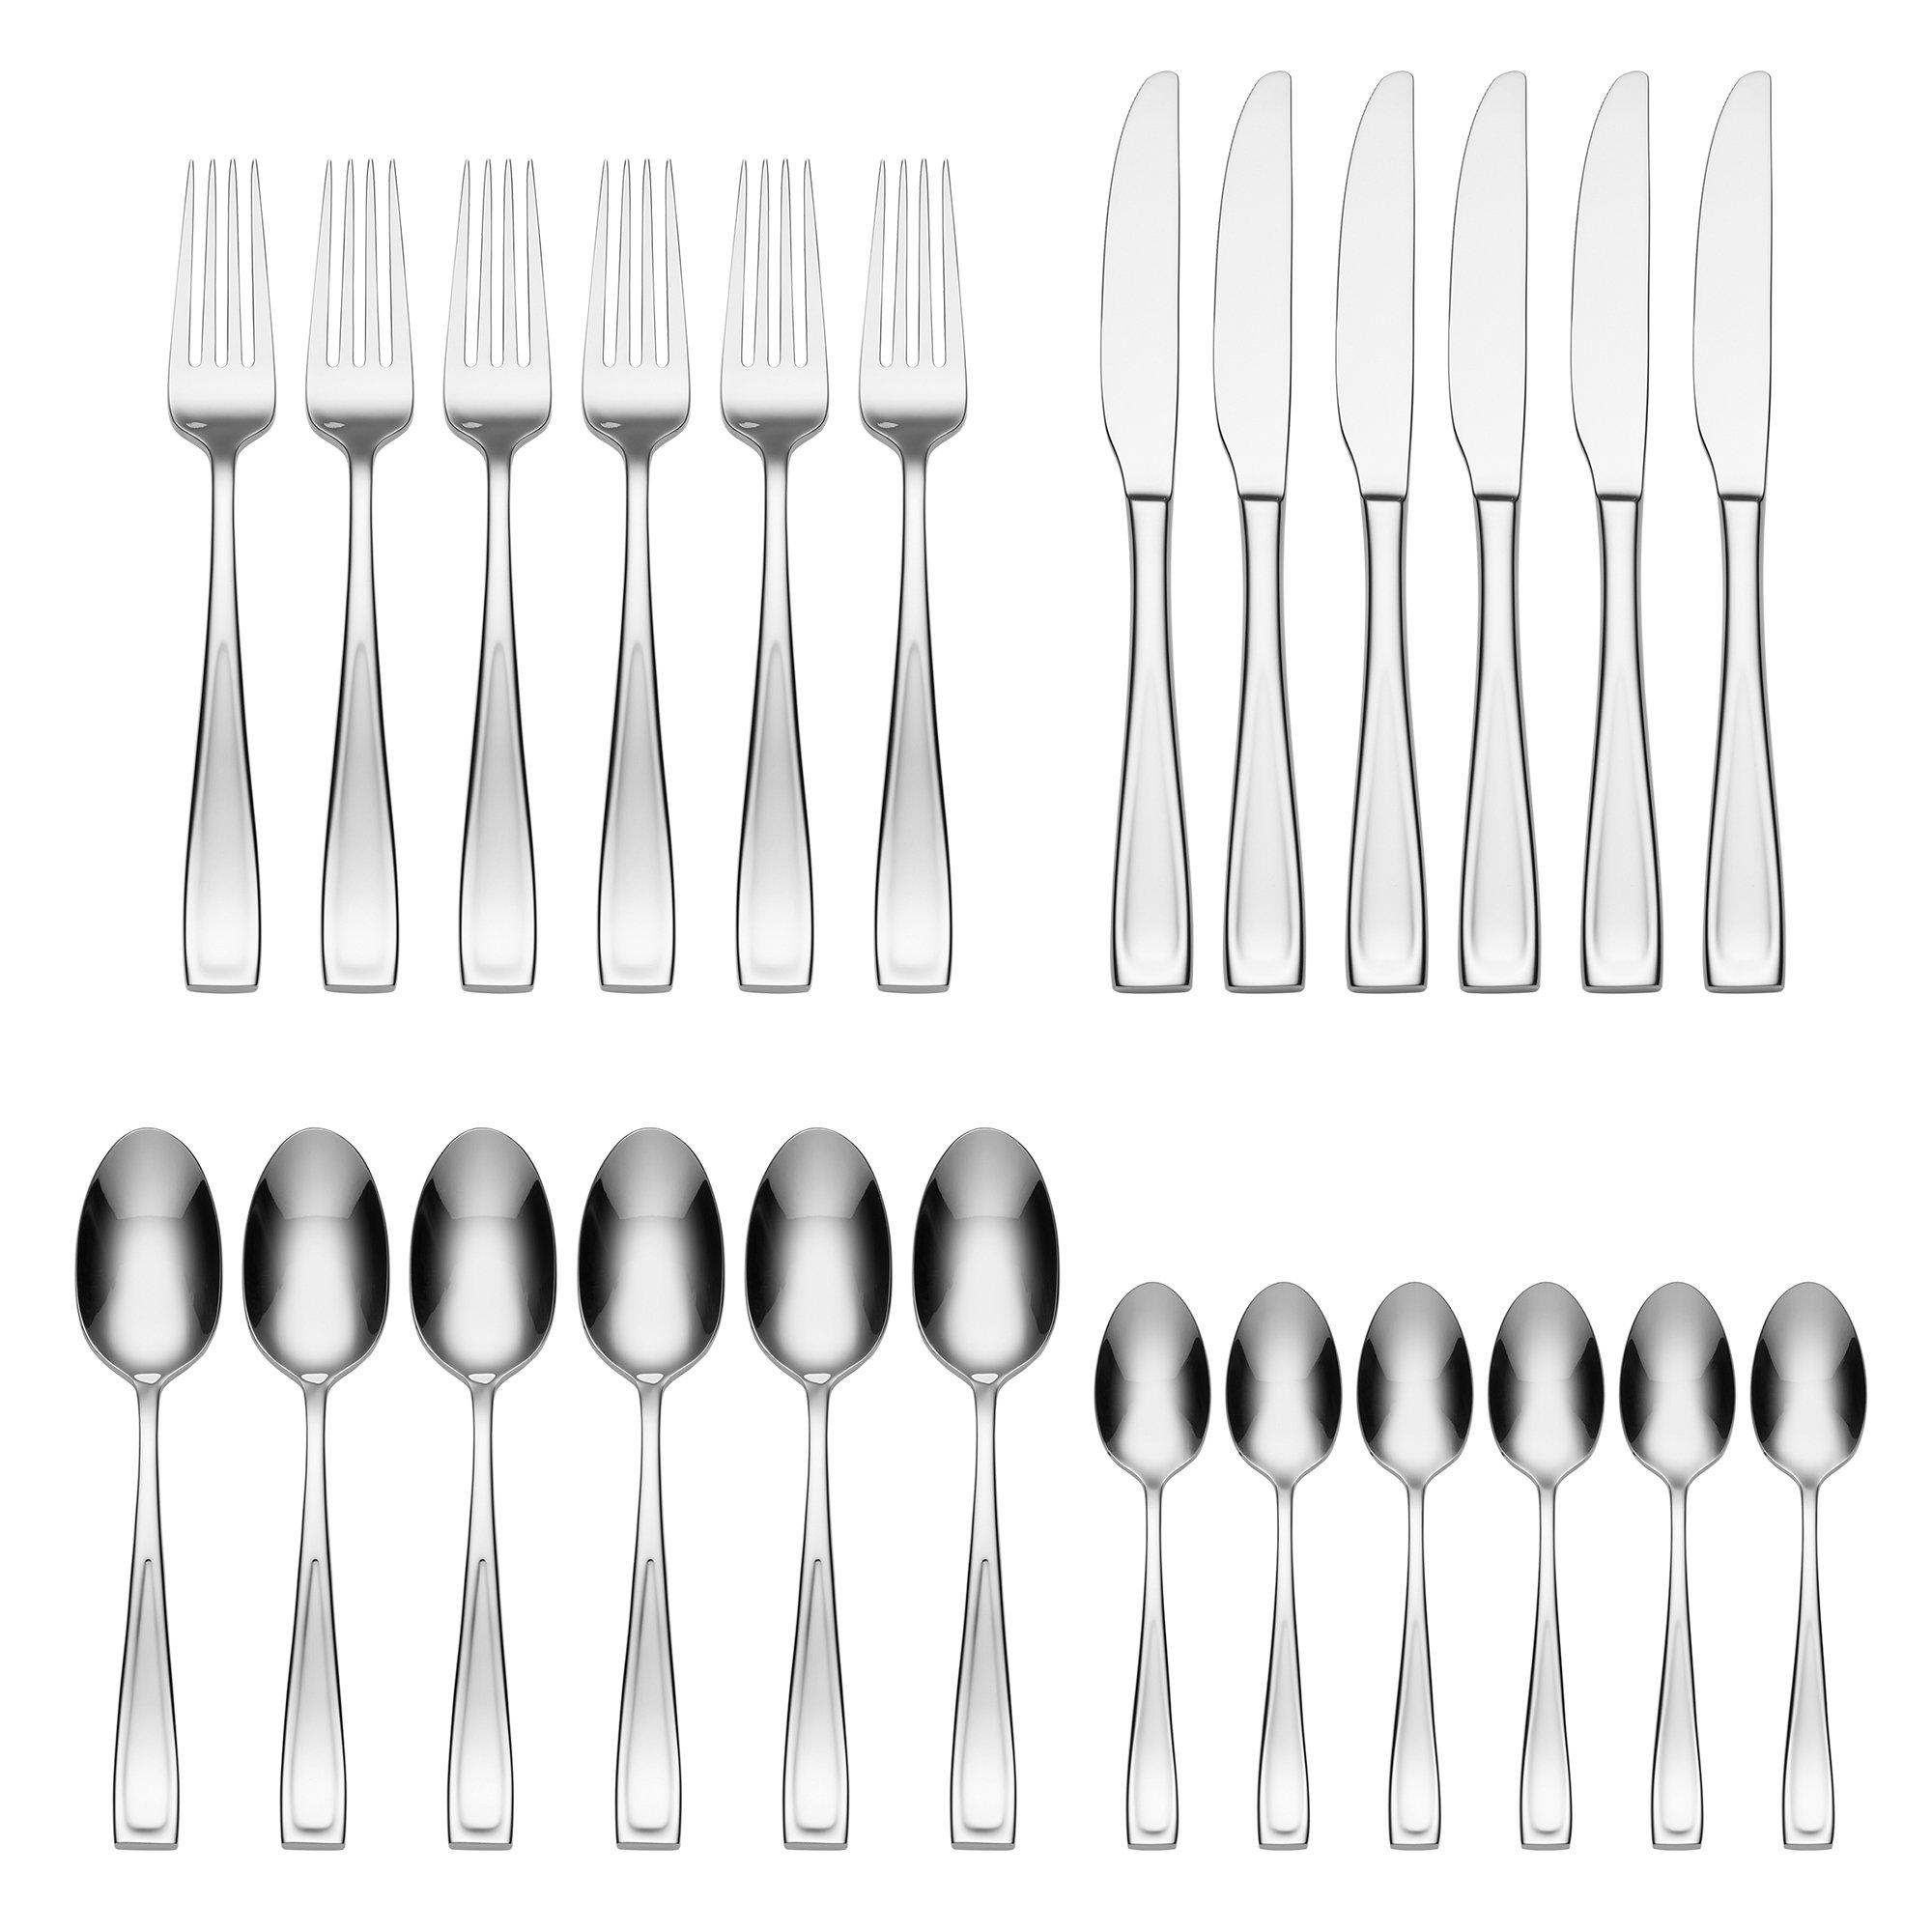 Moda II 24 Piece Culterly Set, Stainless Steel, Rust Resistant, Dishwasher Safe